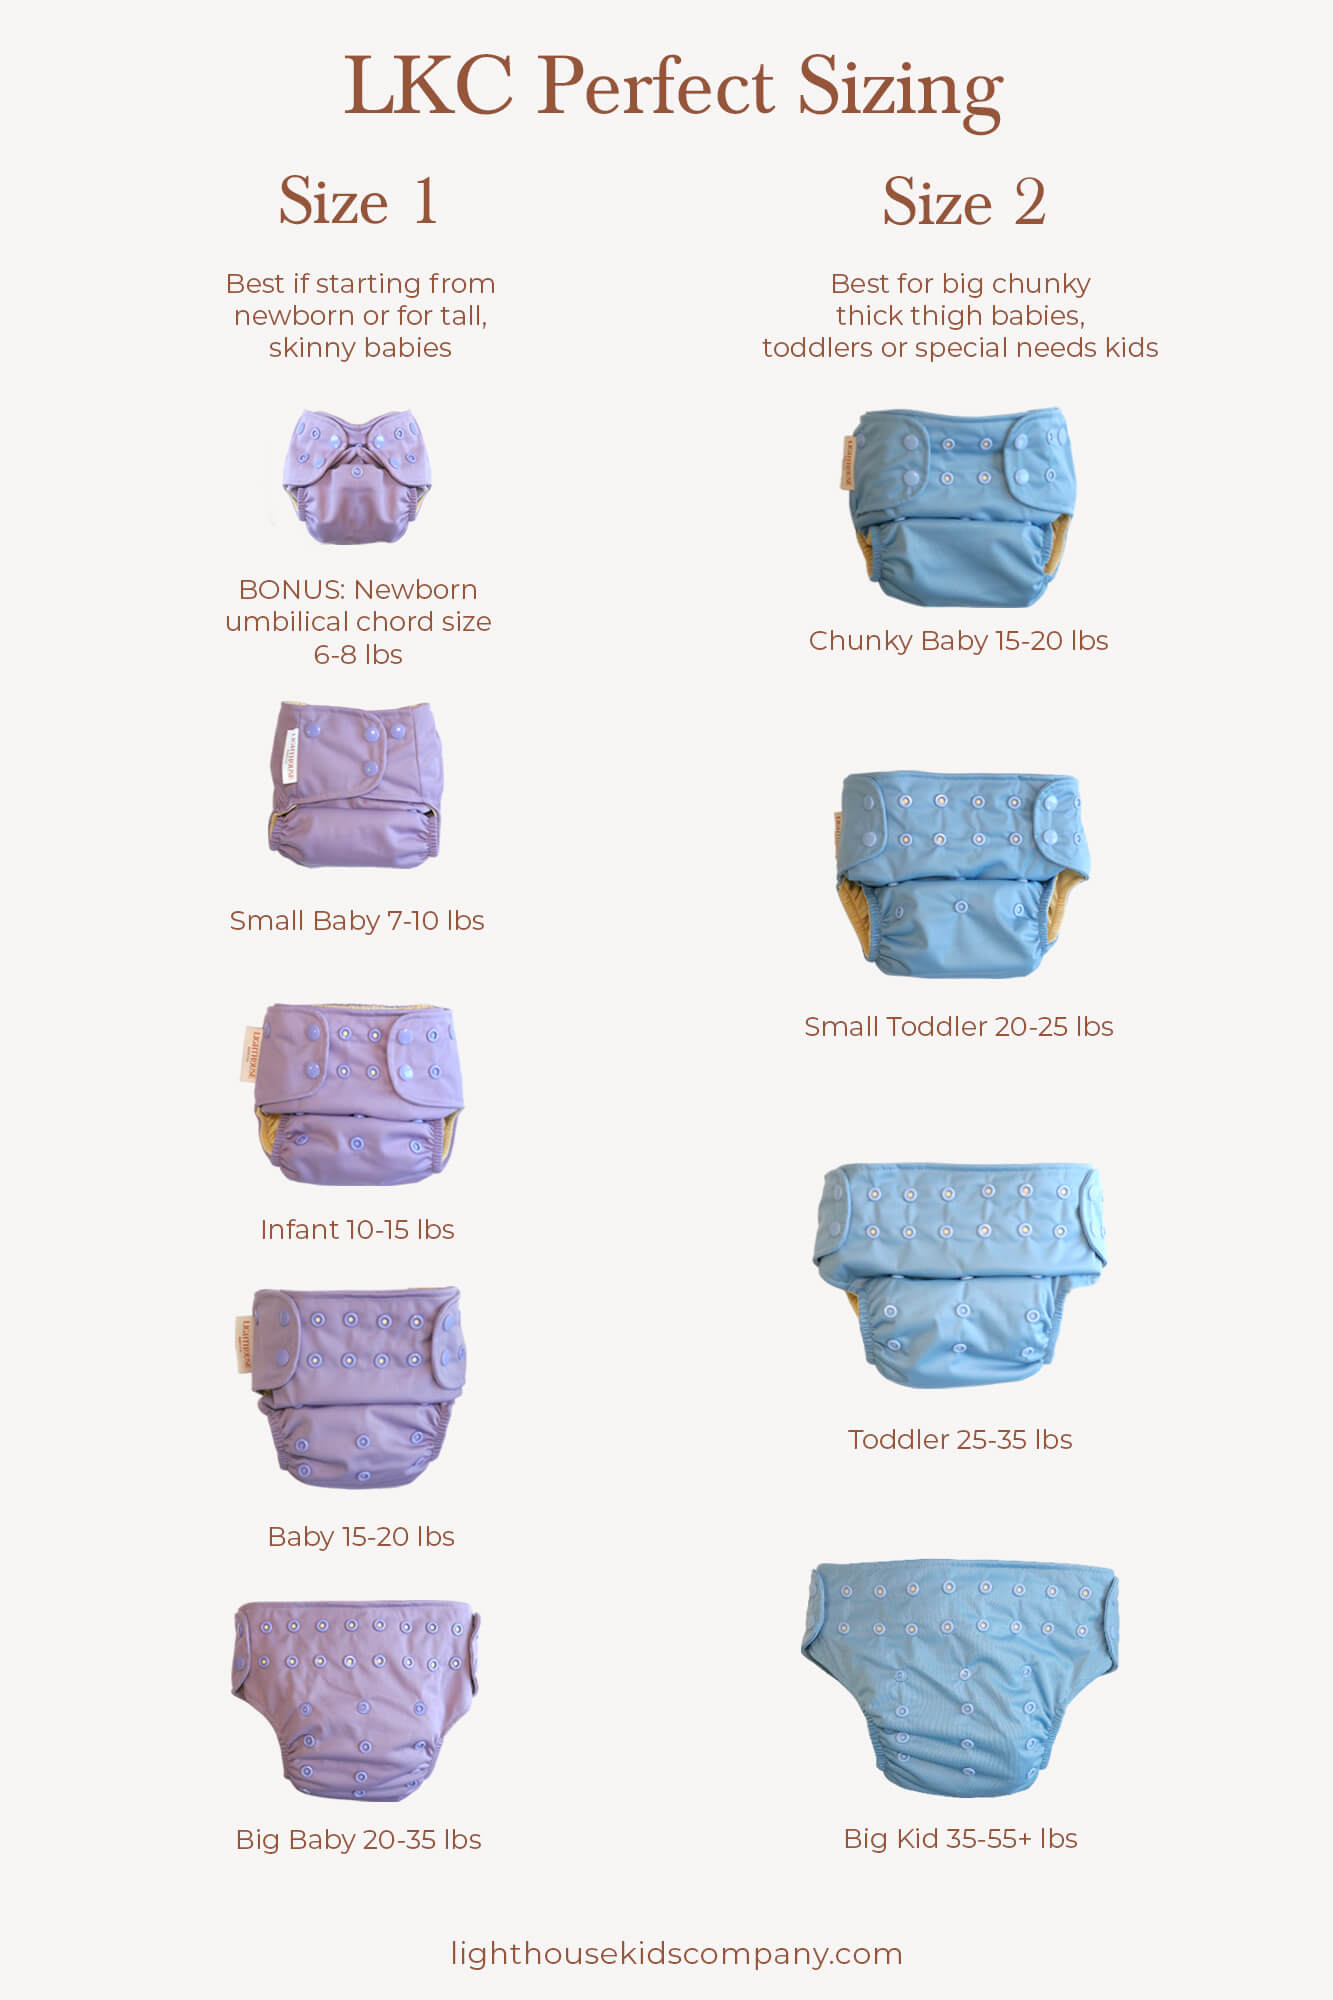 All-In-One Cloth Diaper - Sand